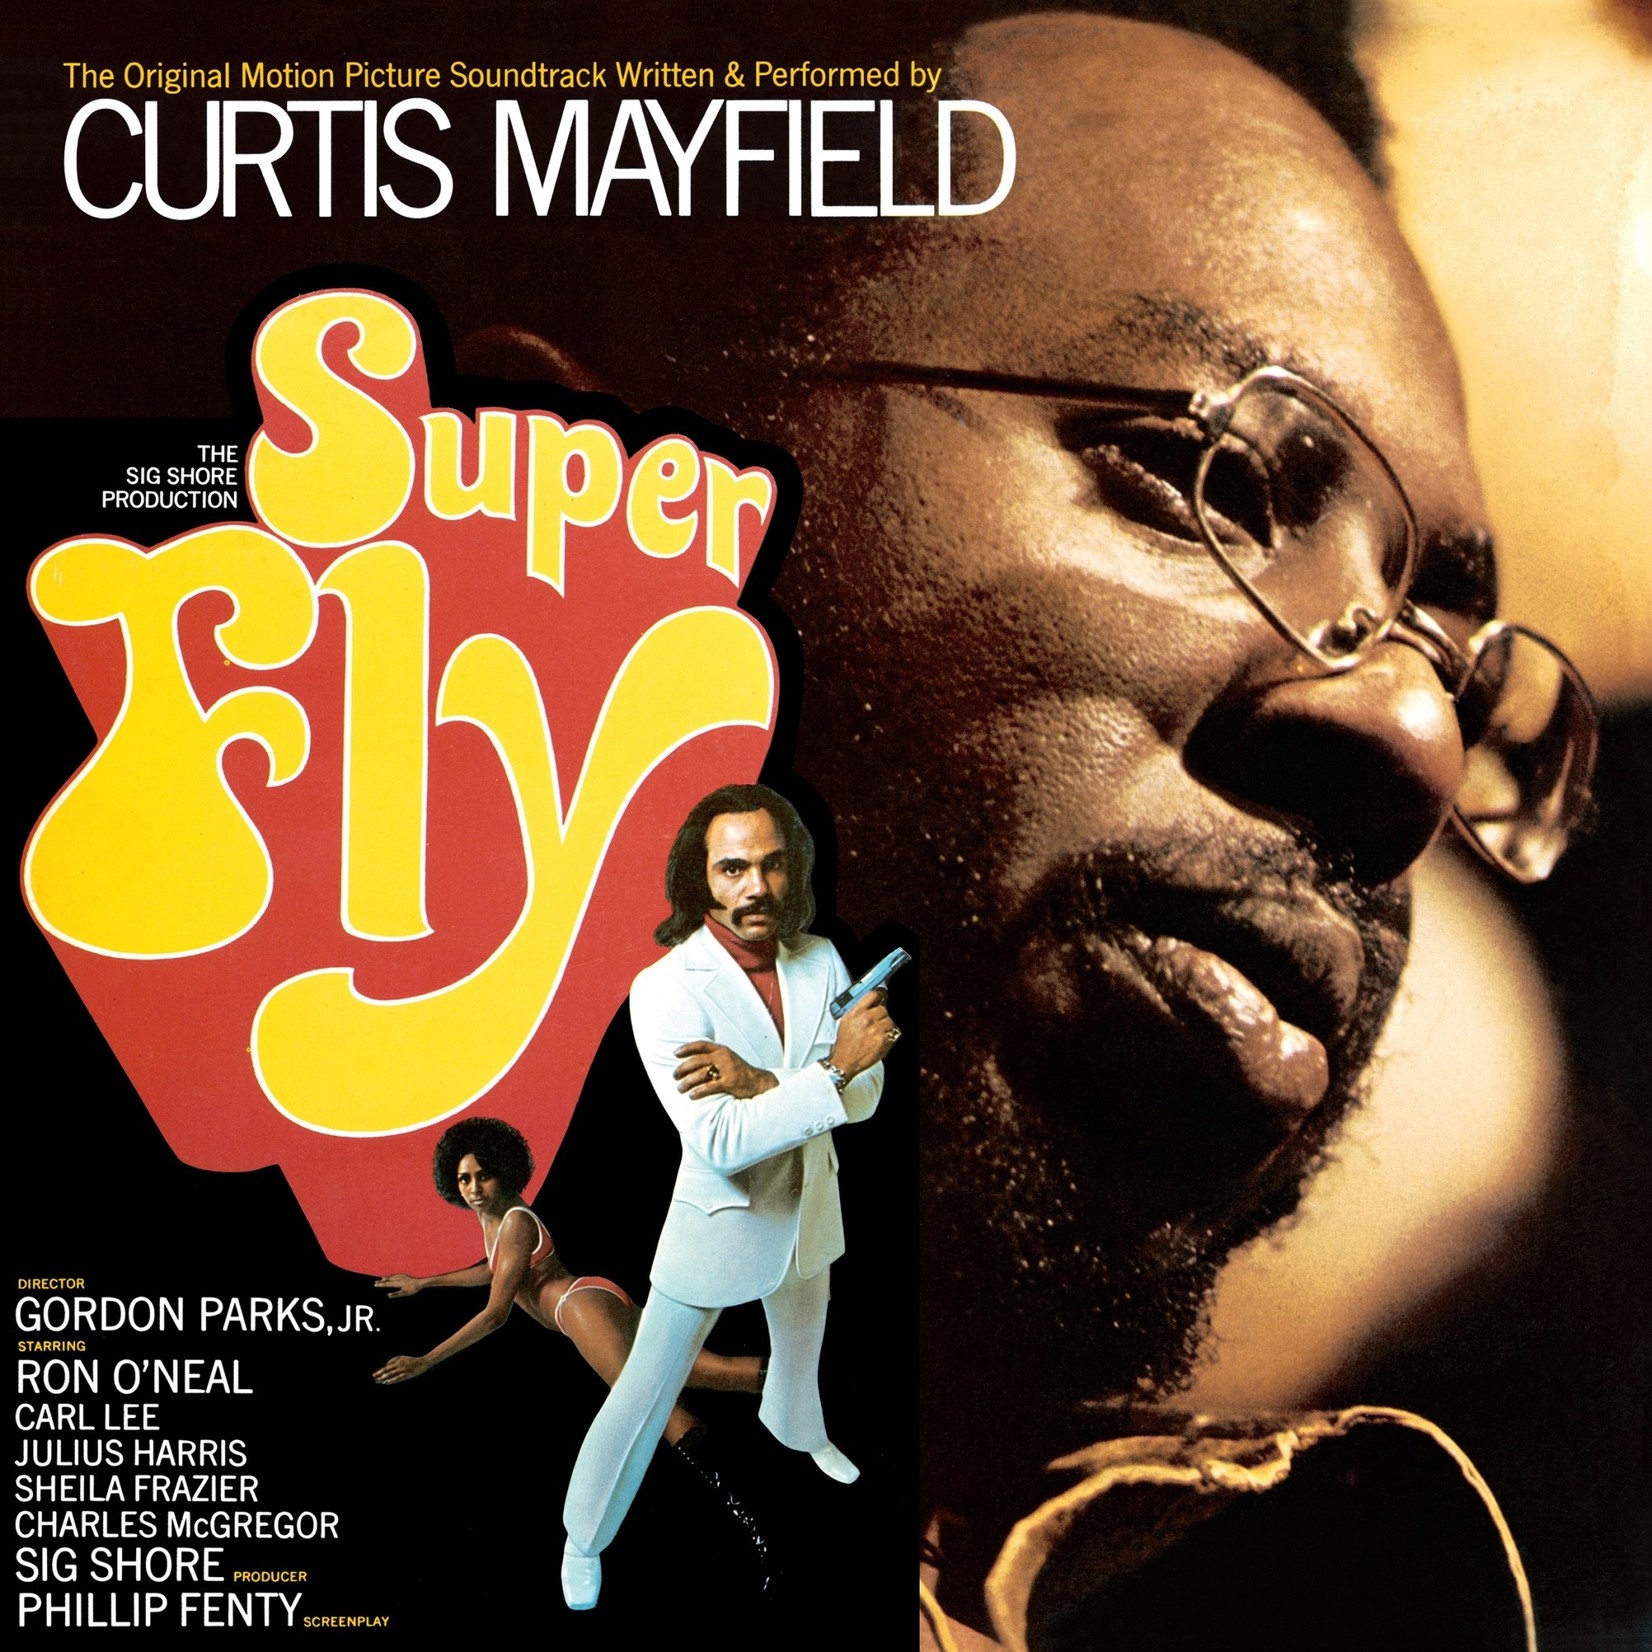 [New] Curtis Mayfield - Super Fly (2LP, 50th Anniversary, poster, turntable mat)